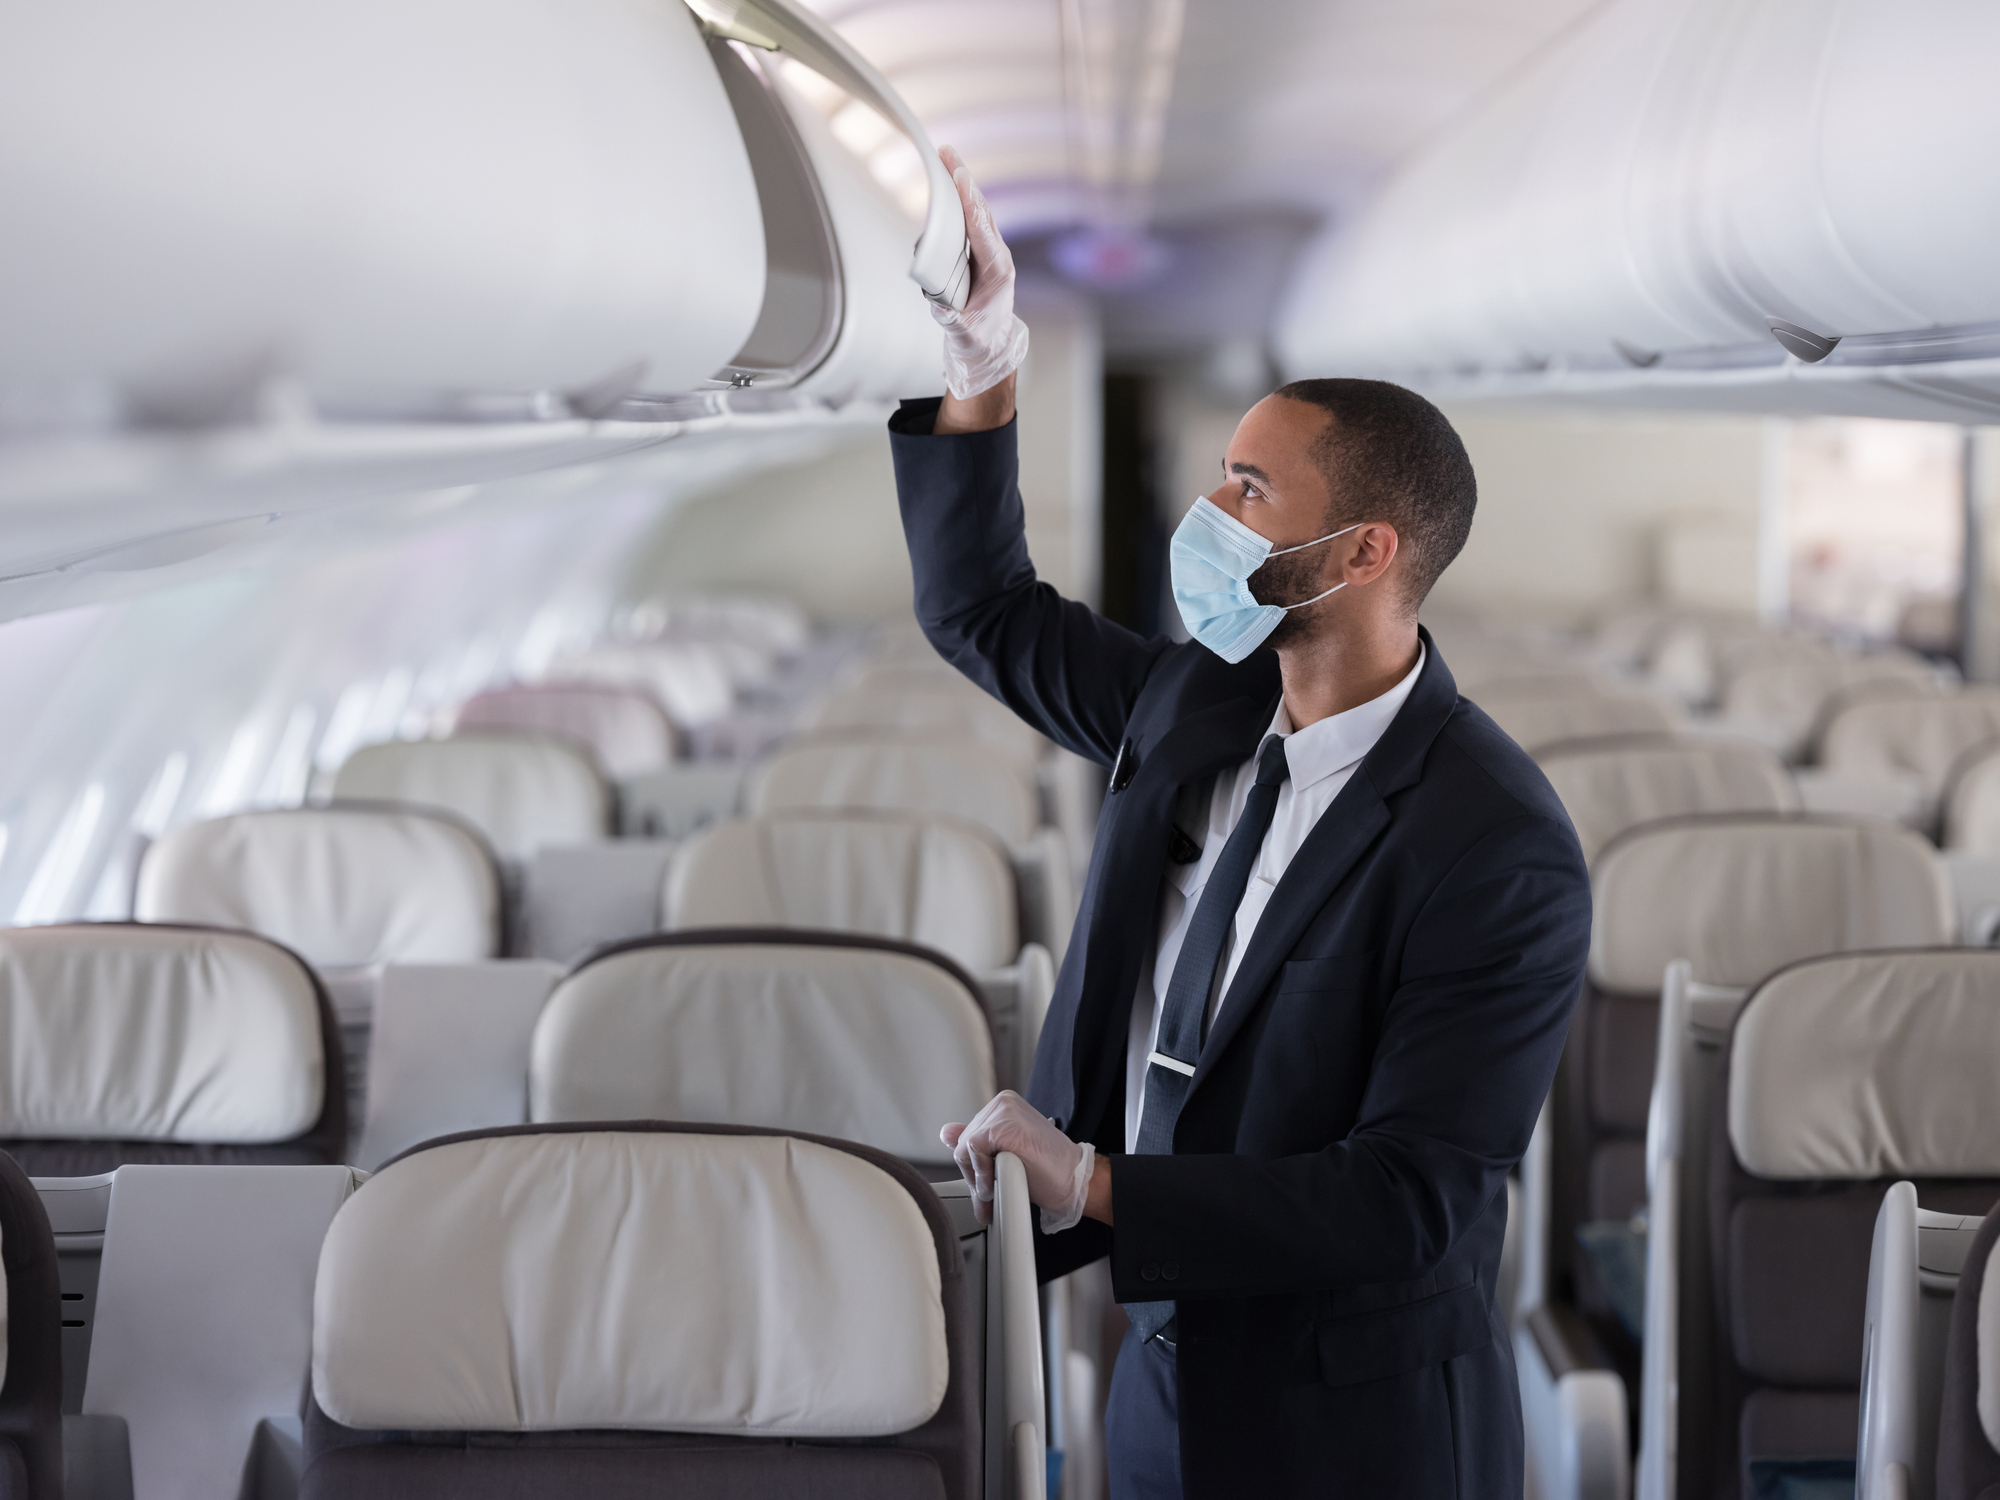 Some U.S. Airlines Will Not Force Passengers To Wear Face Masks On Flights